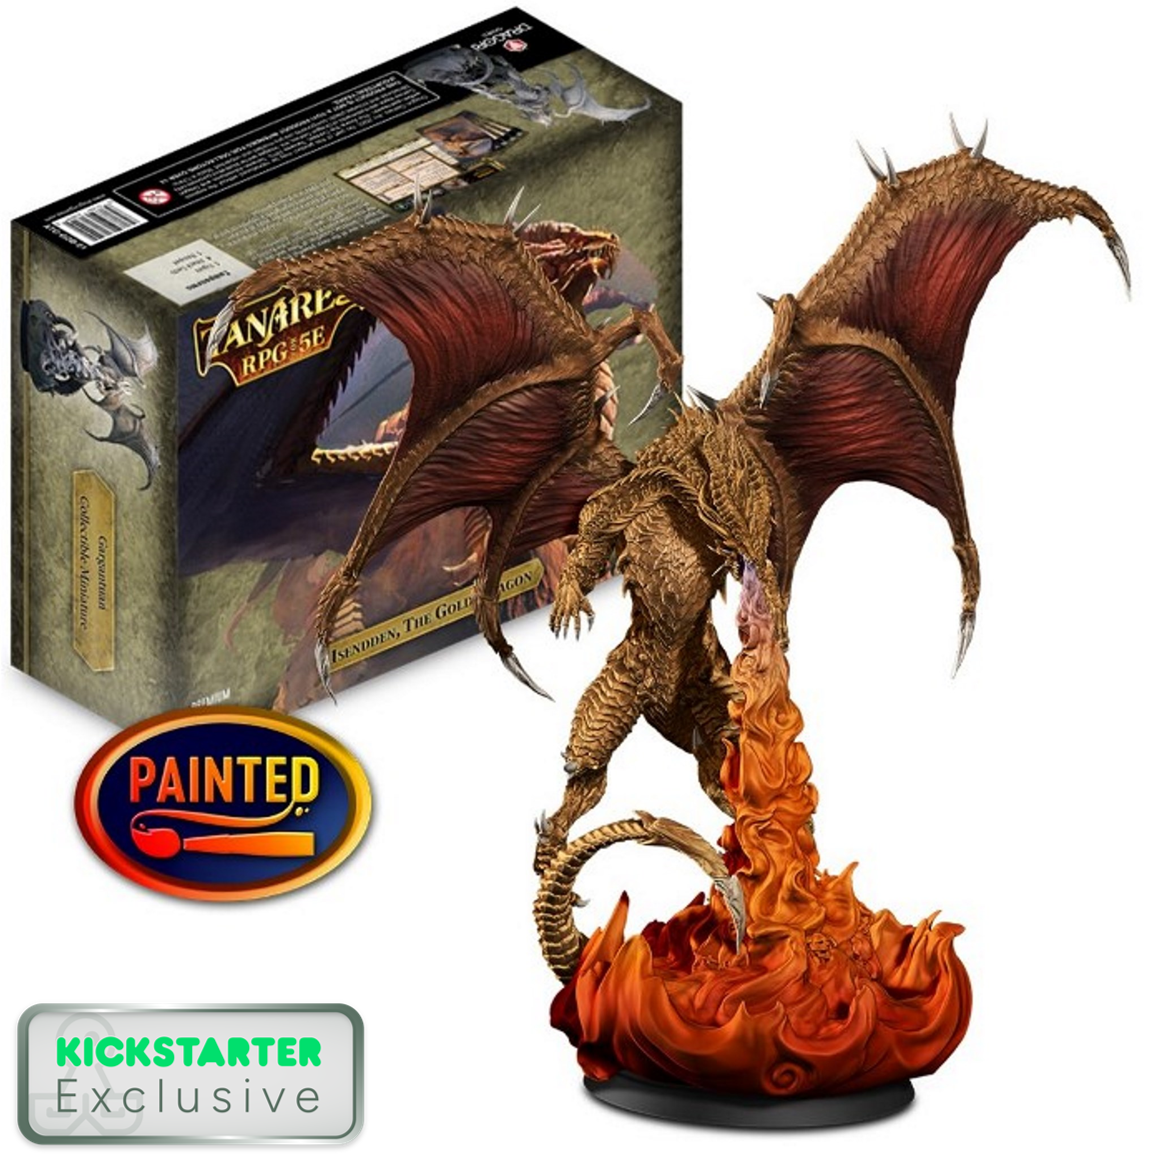 Tanares Adventures Ultimate All-In, Painted Edition, Gold Dragon Expansion